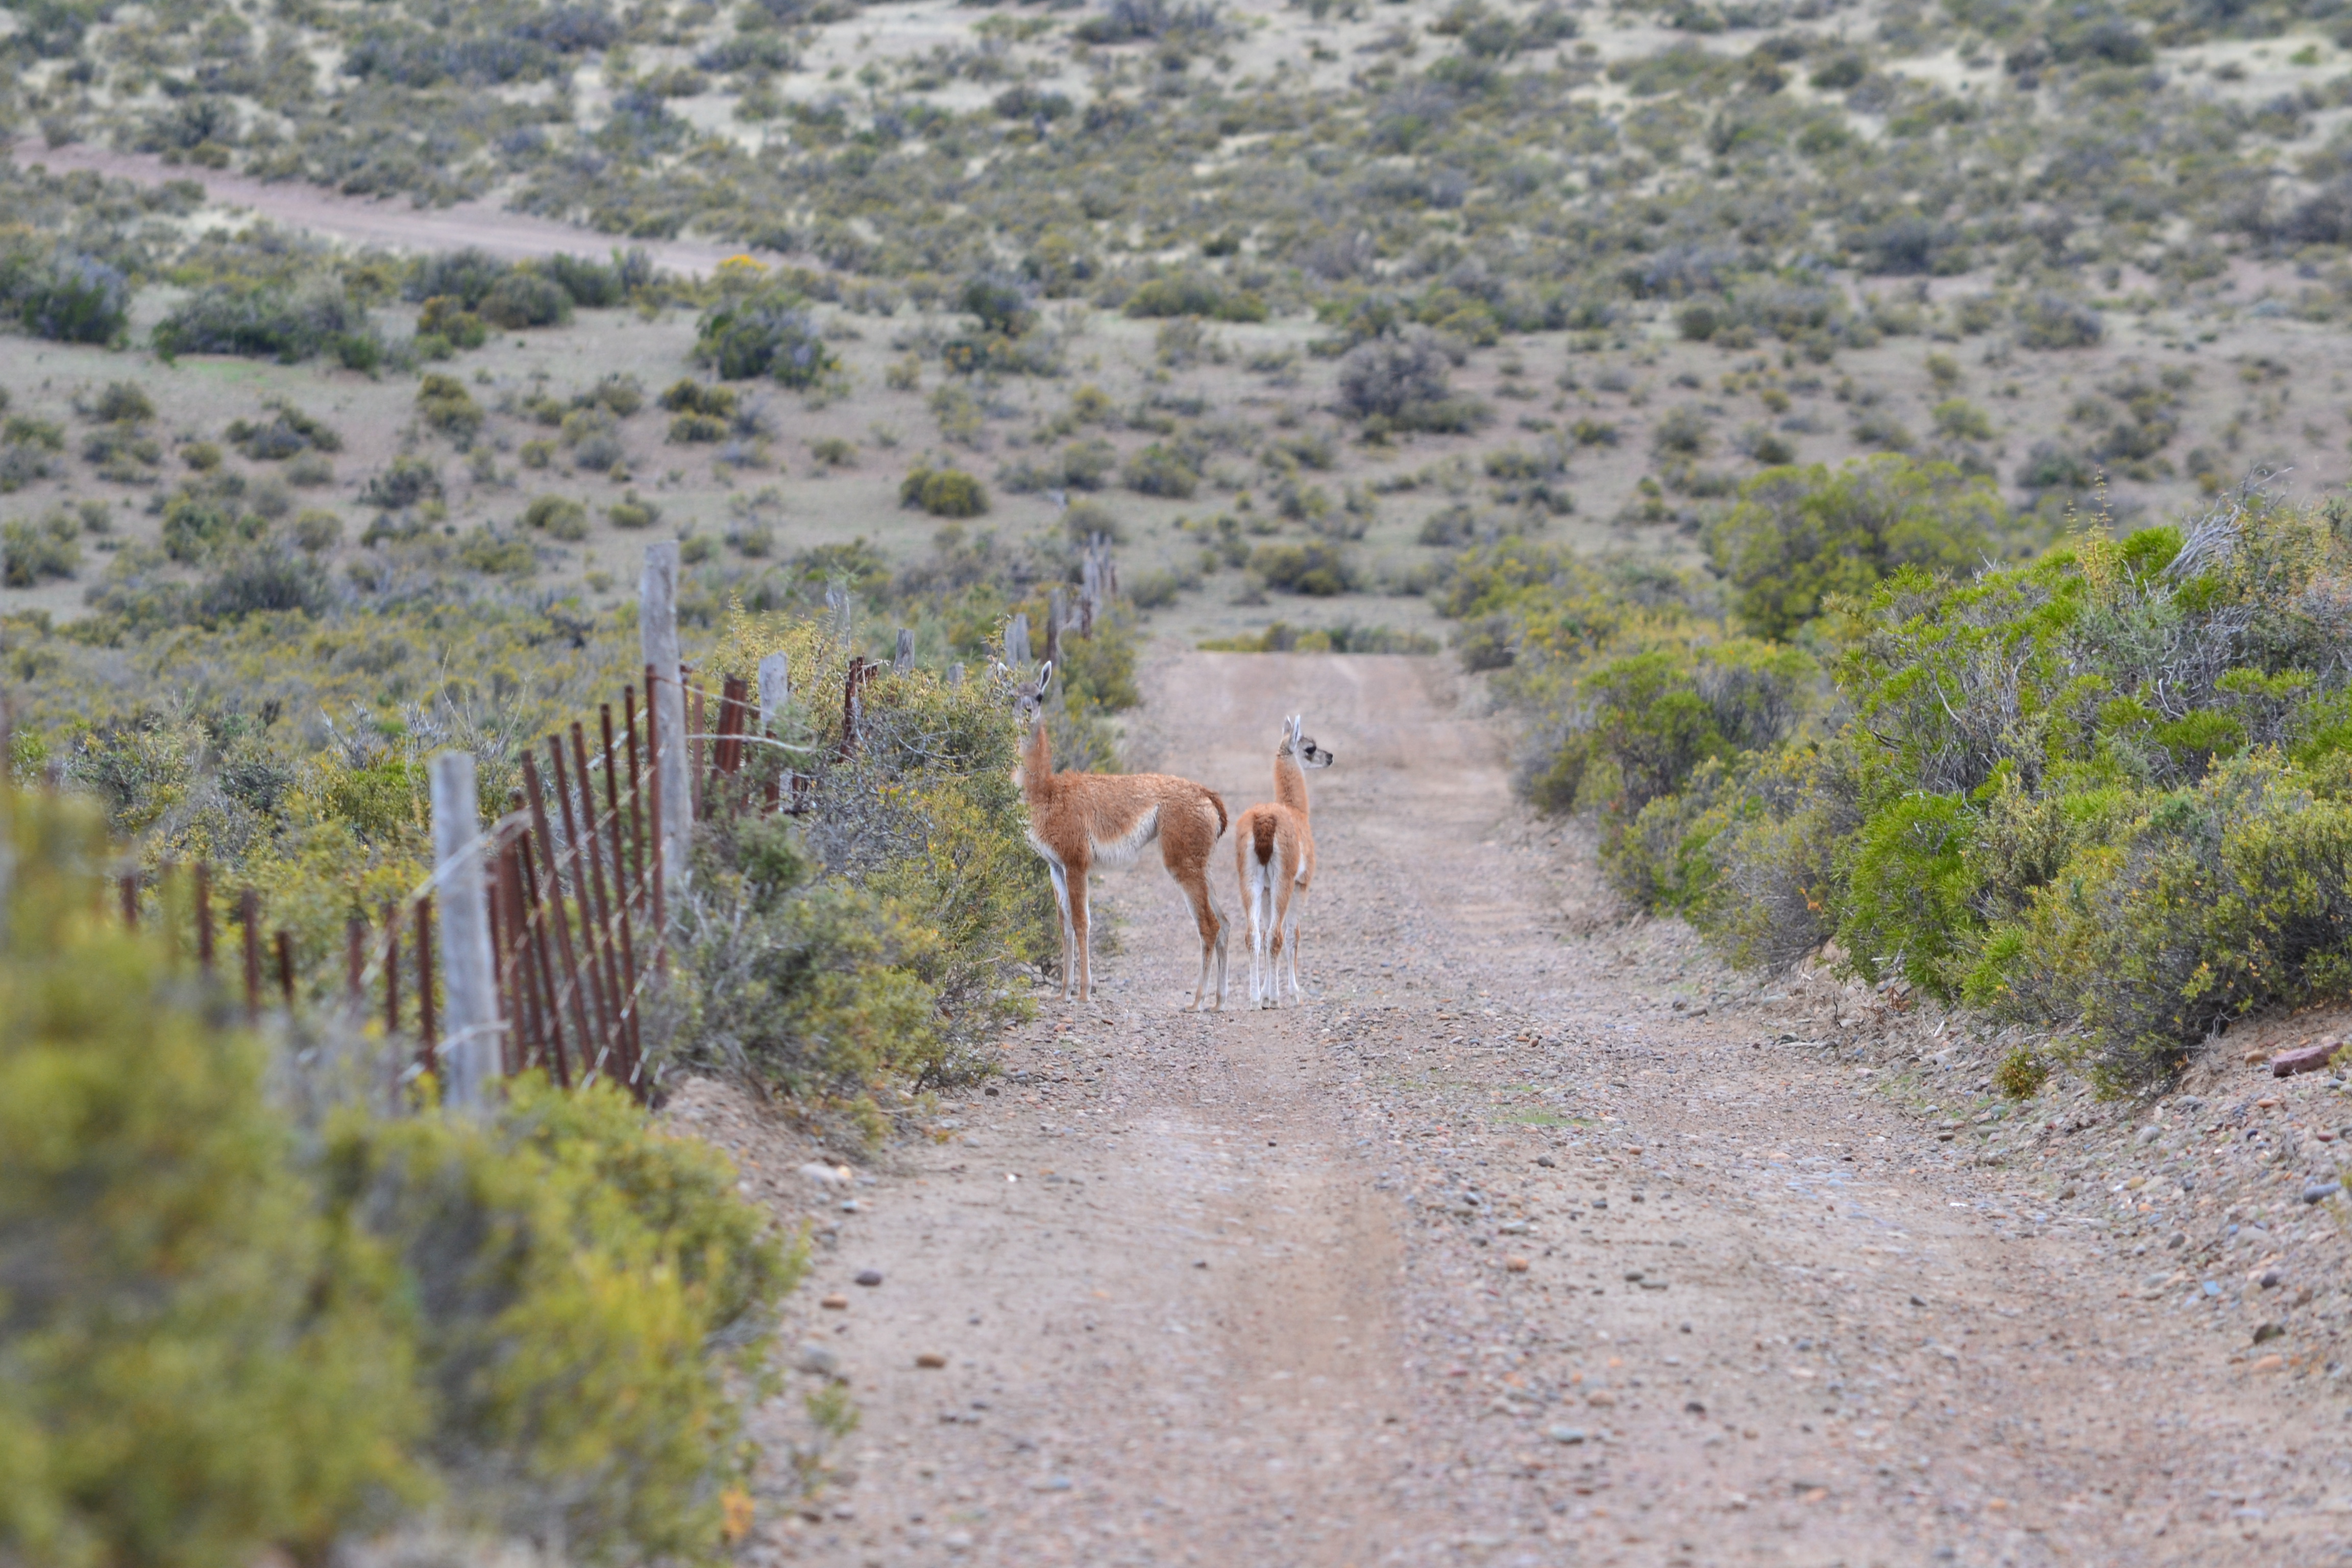 Two guanacos standing in the middle of a dirt road